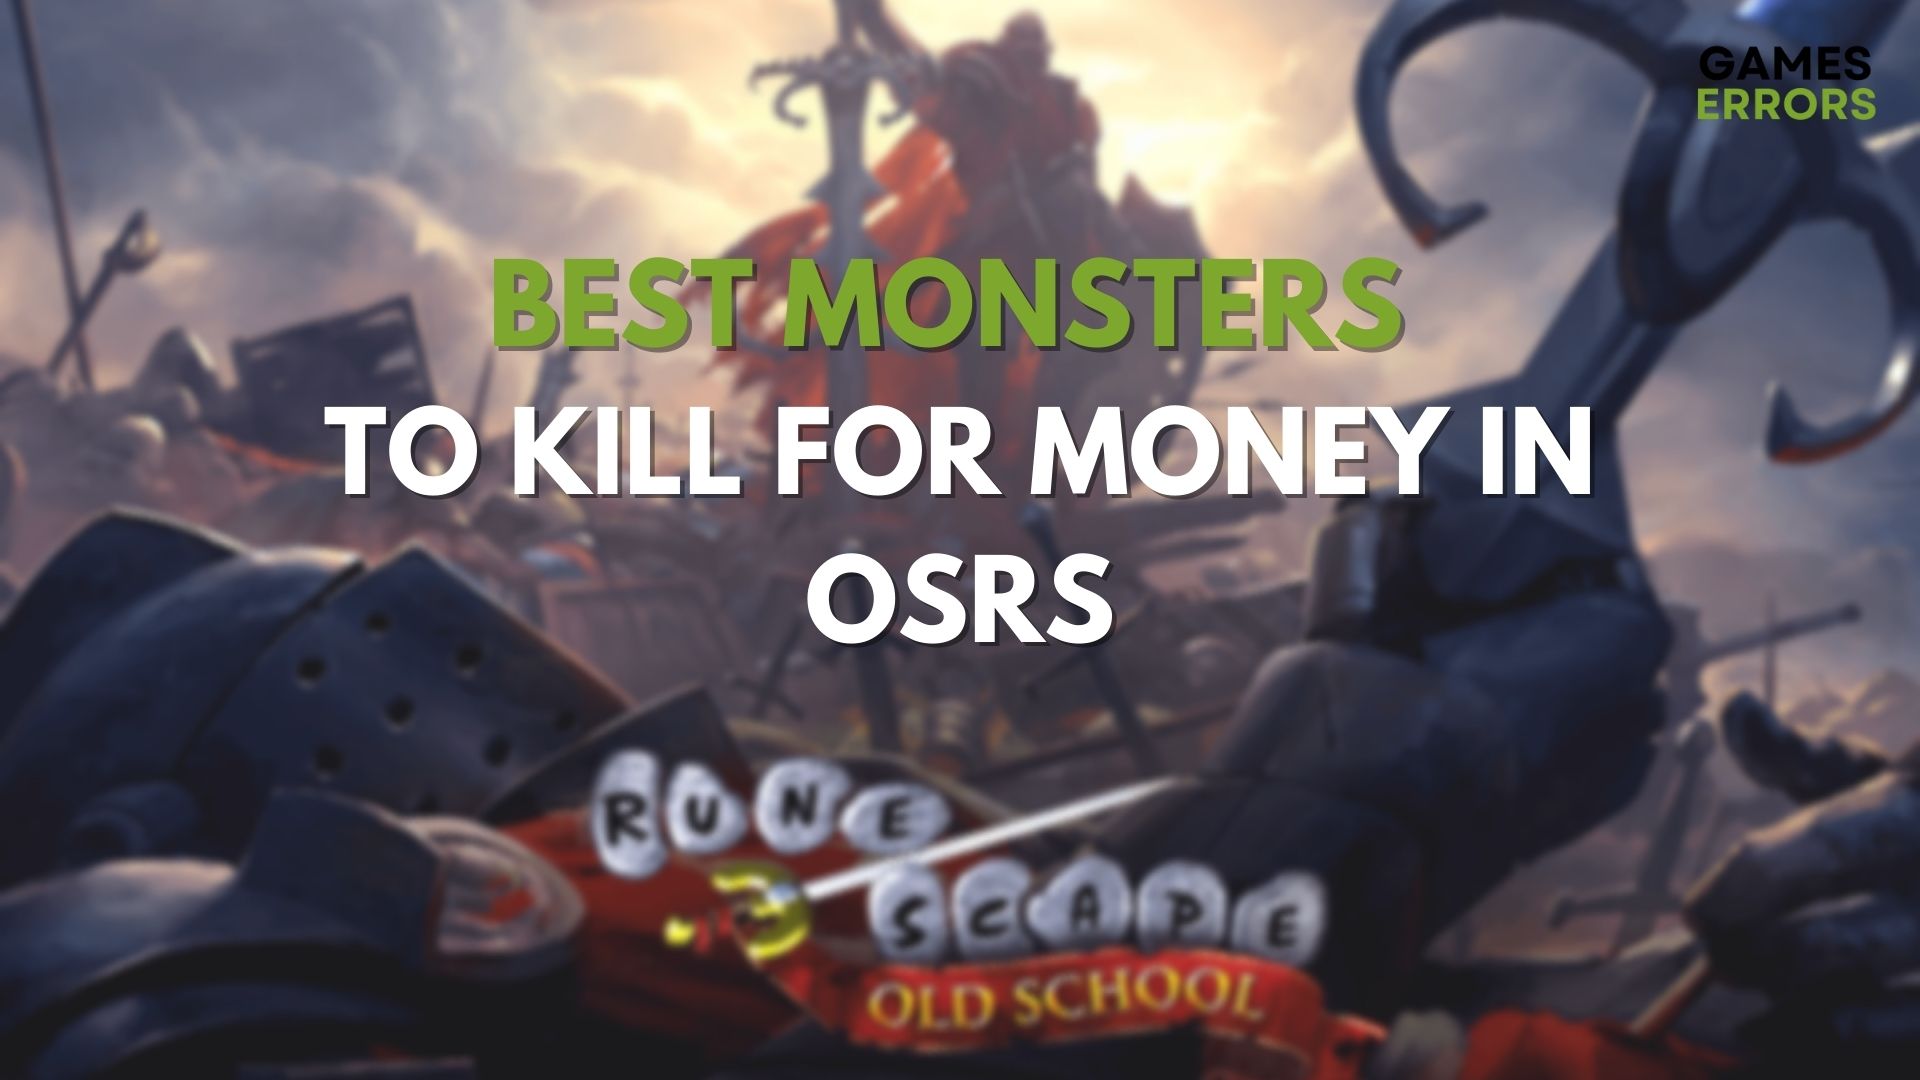 Best Monsters to Kill for Money in OSRS